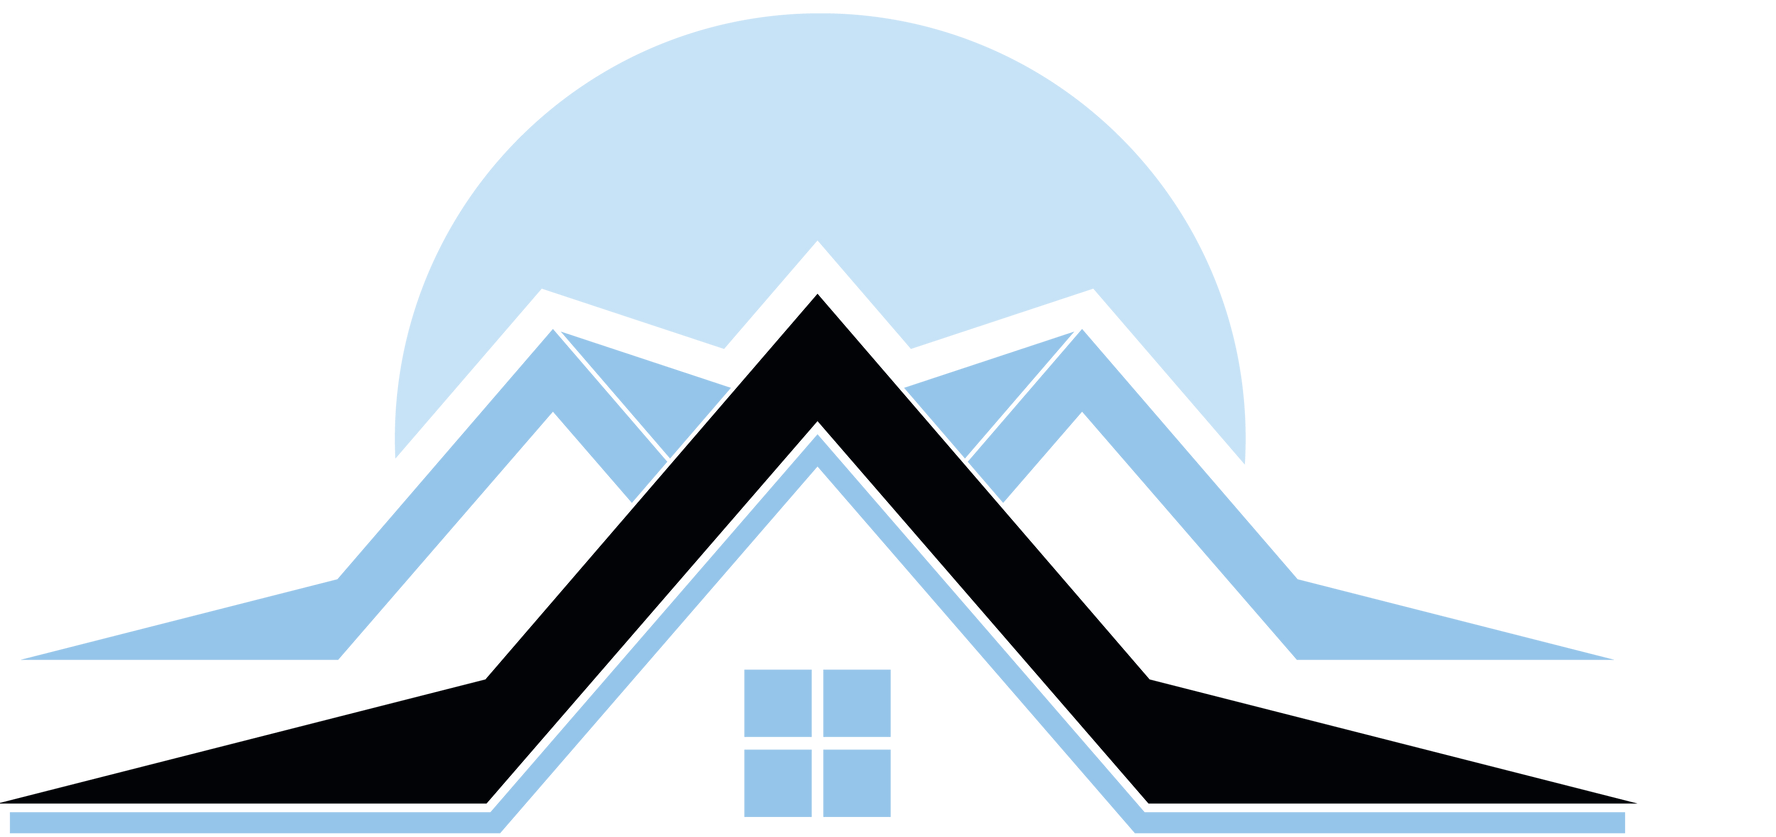 A black and white logo of a house with mountains in the background.